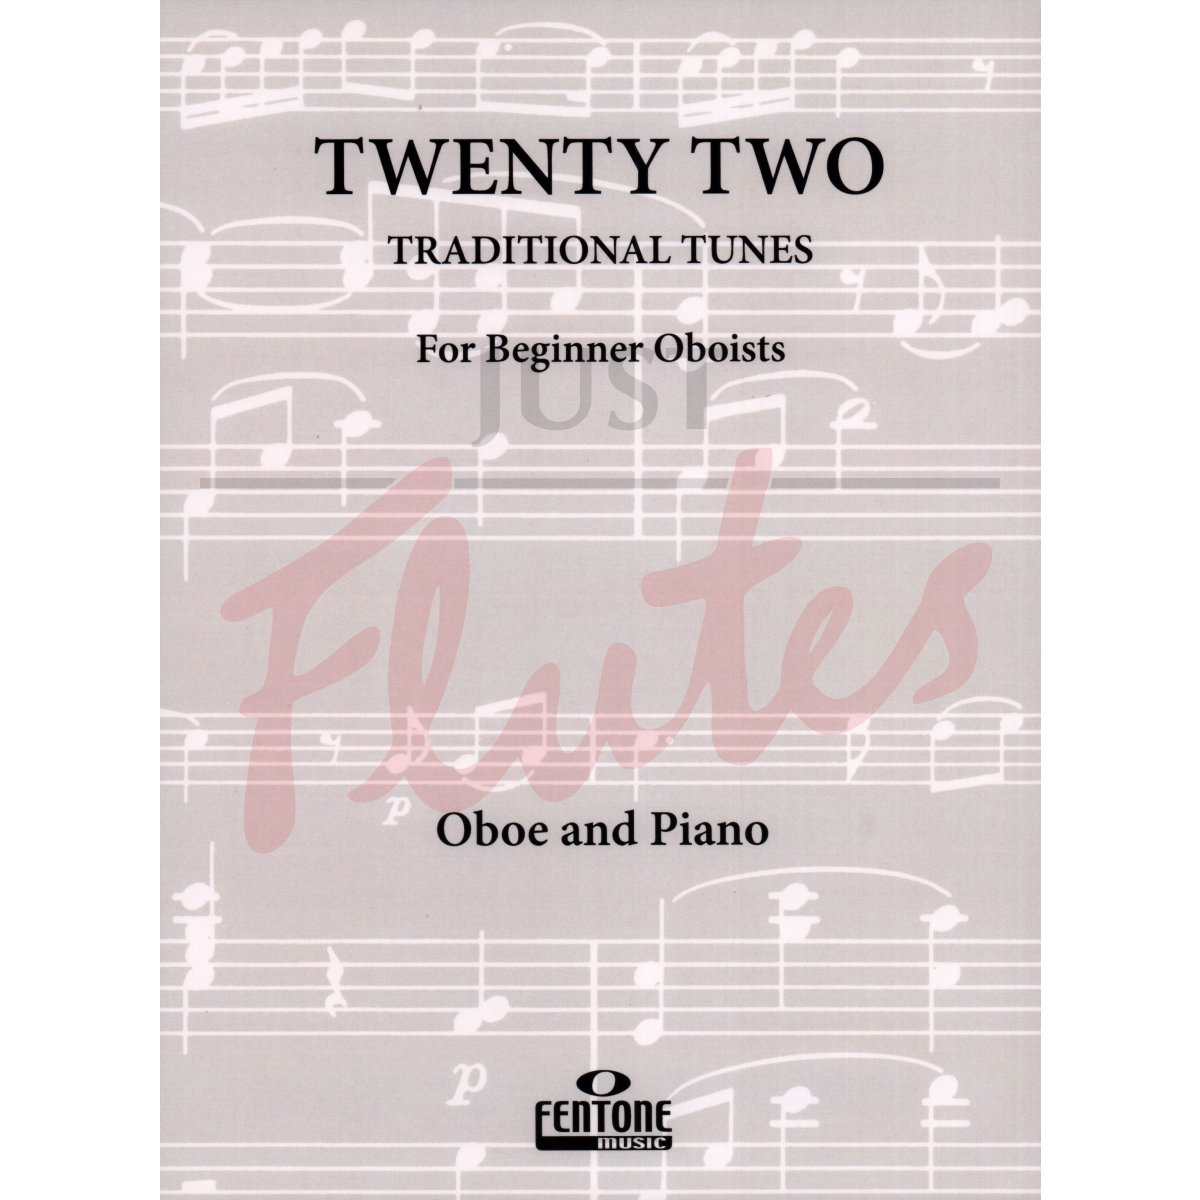 Twenty Two Traditional Tunes for Beginner Oboists with Piano Accompaniment